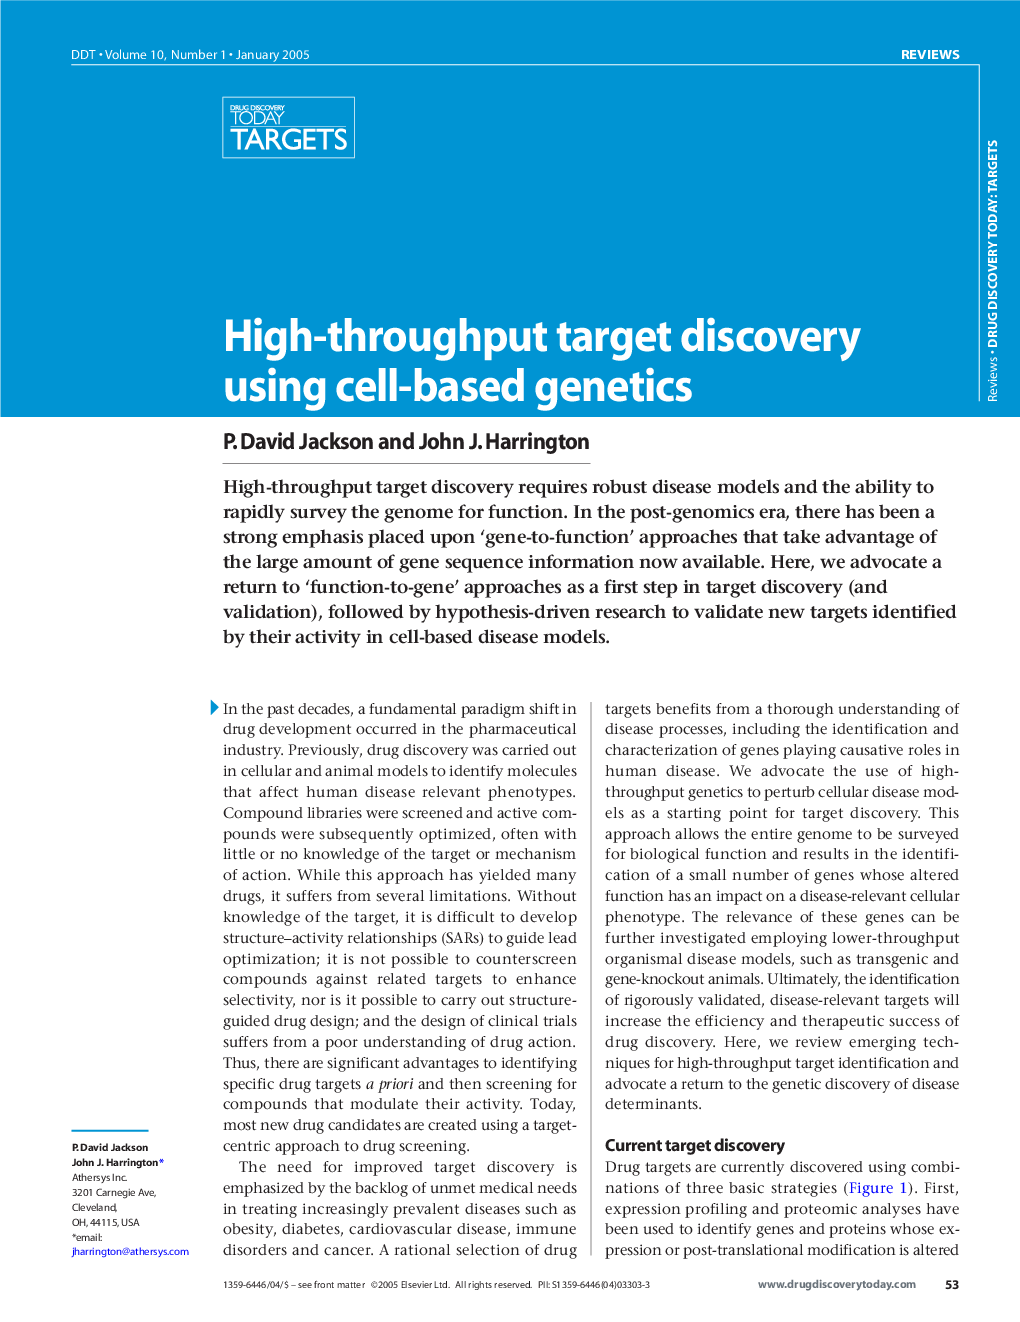 High-throughput target discovery using cell-based genetics